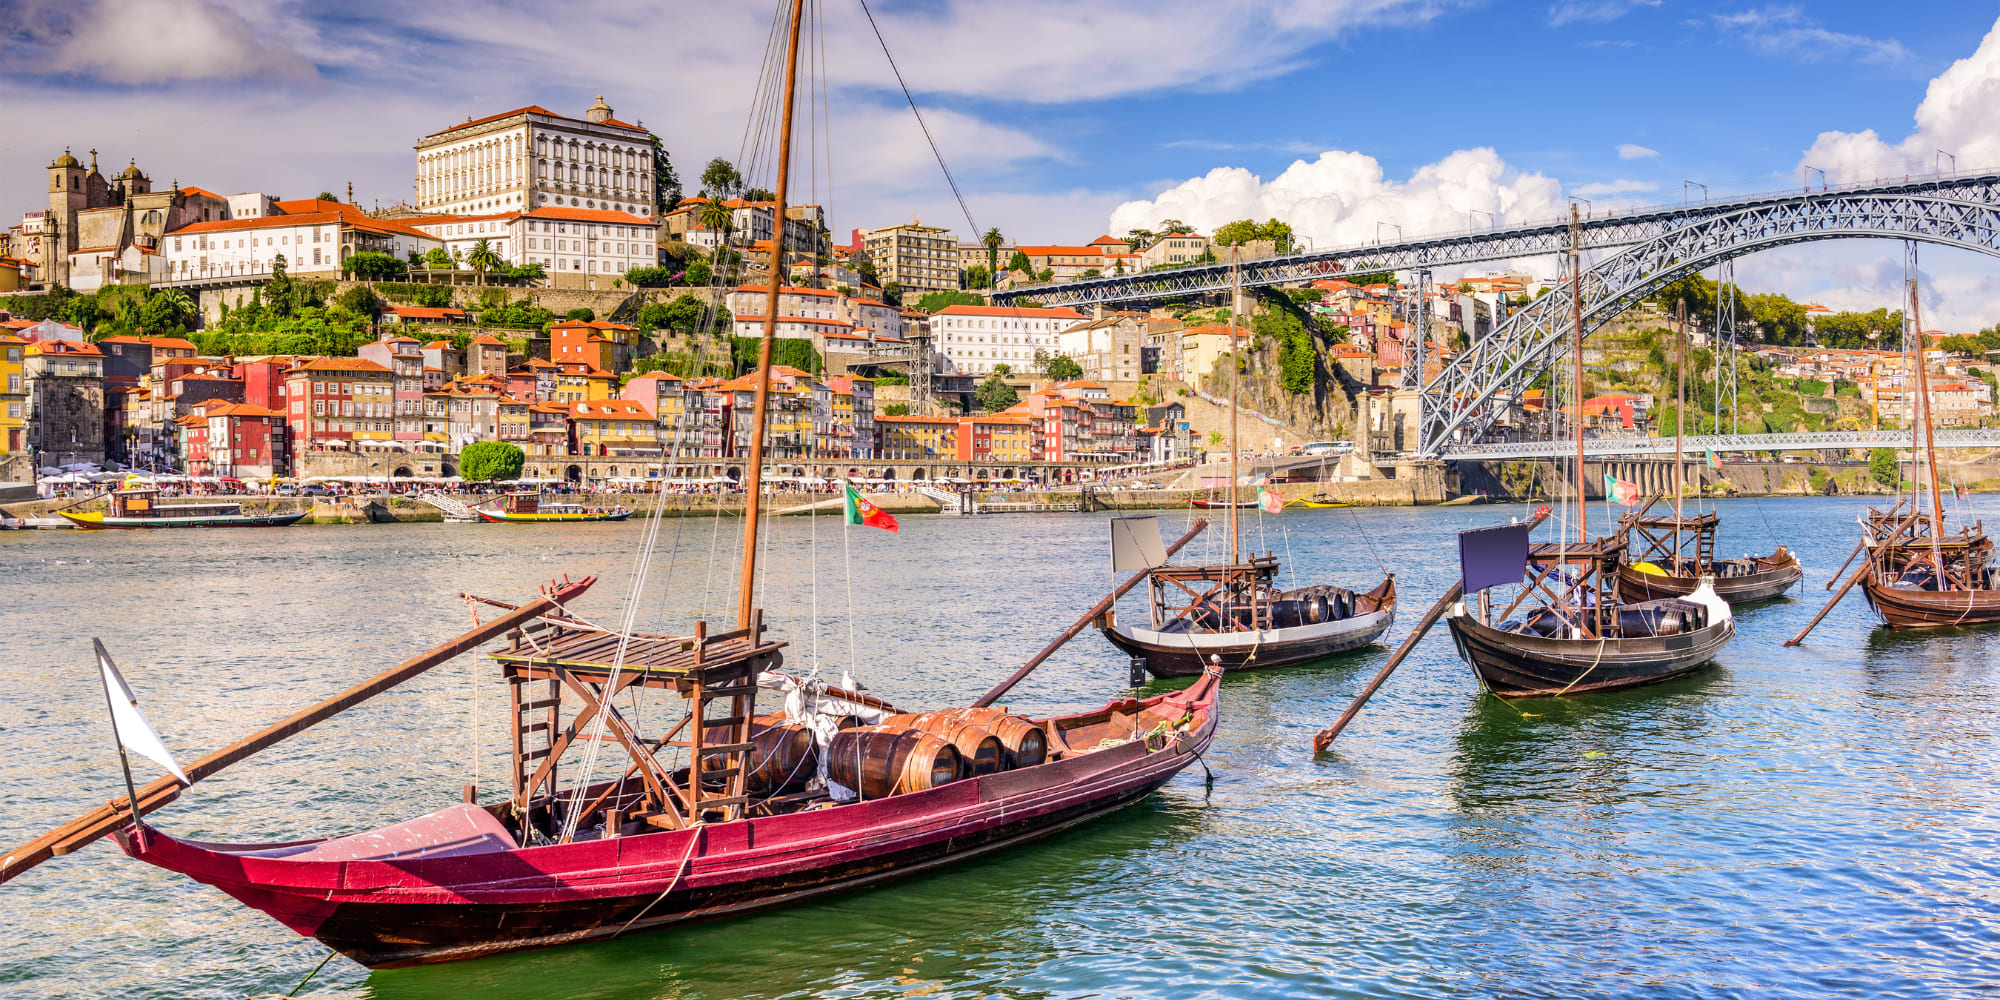 The cheapest countries to study in Europe - Portugal